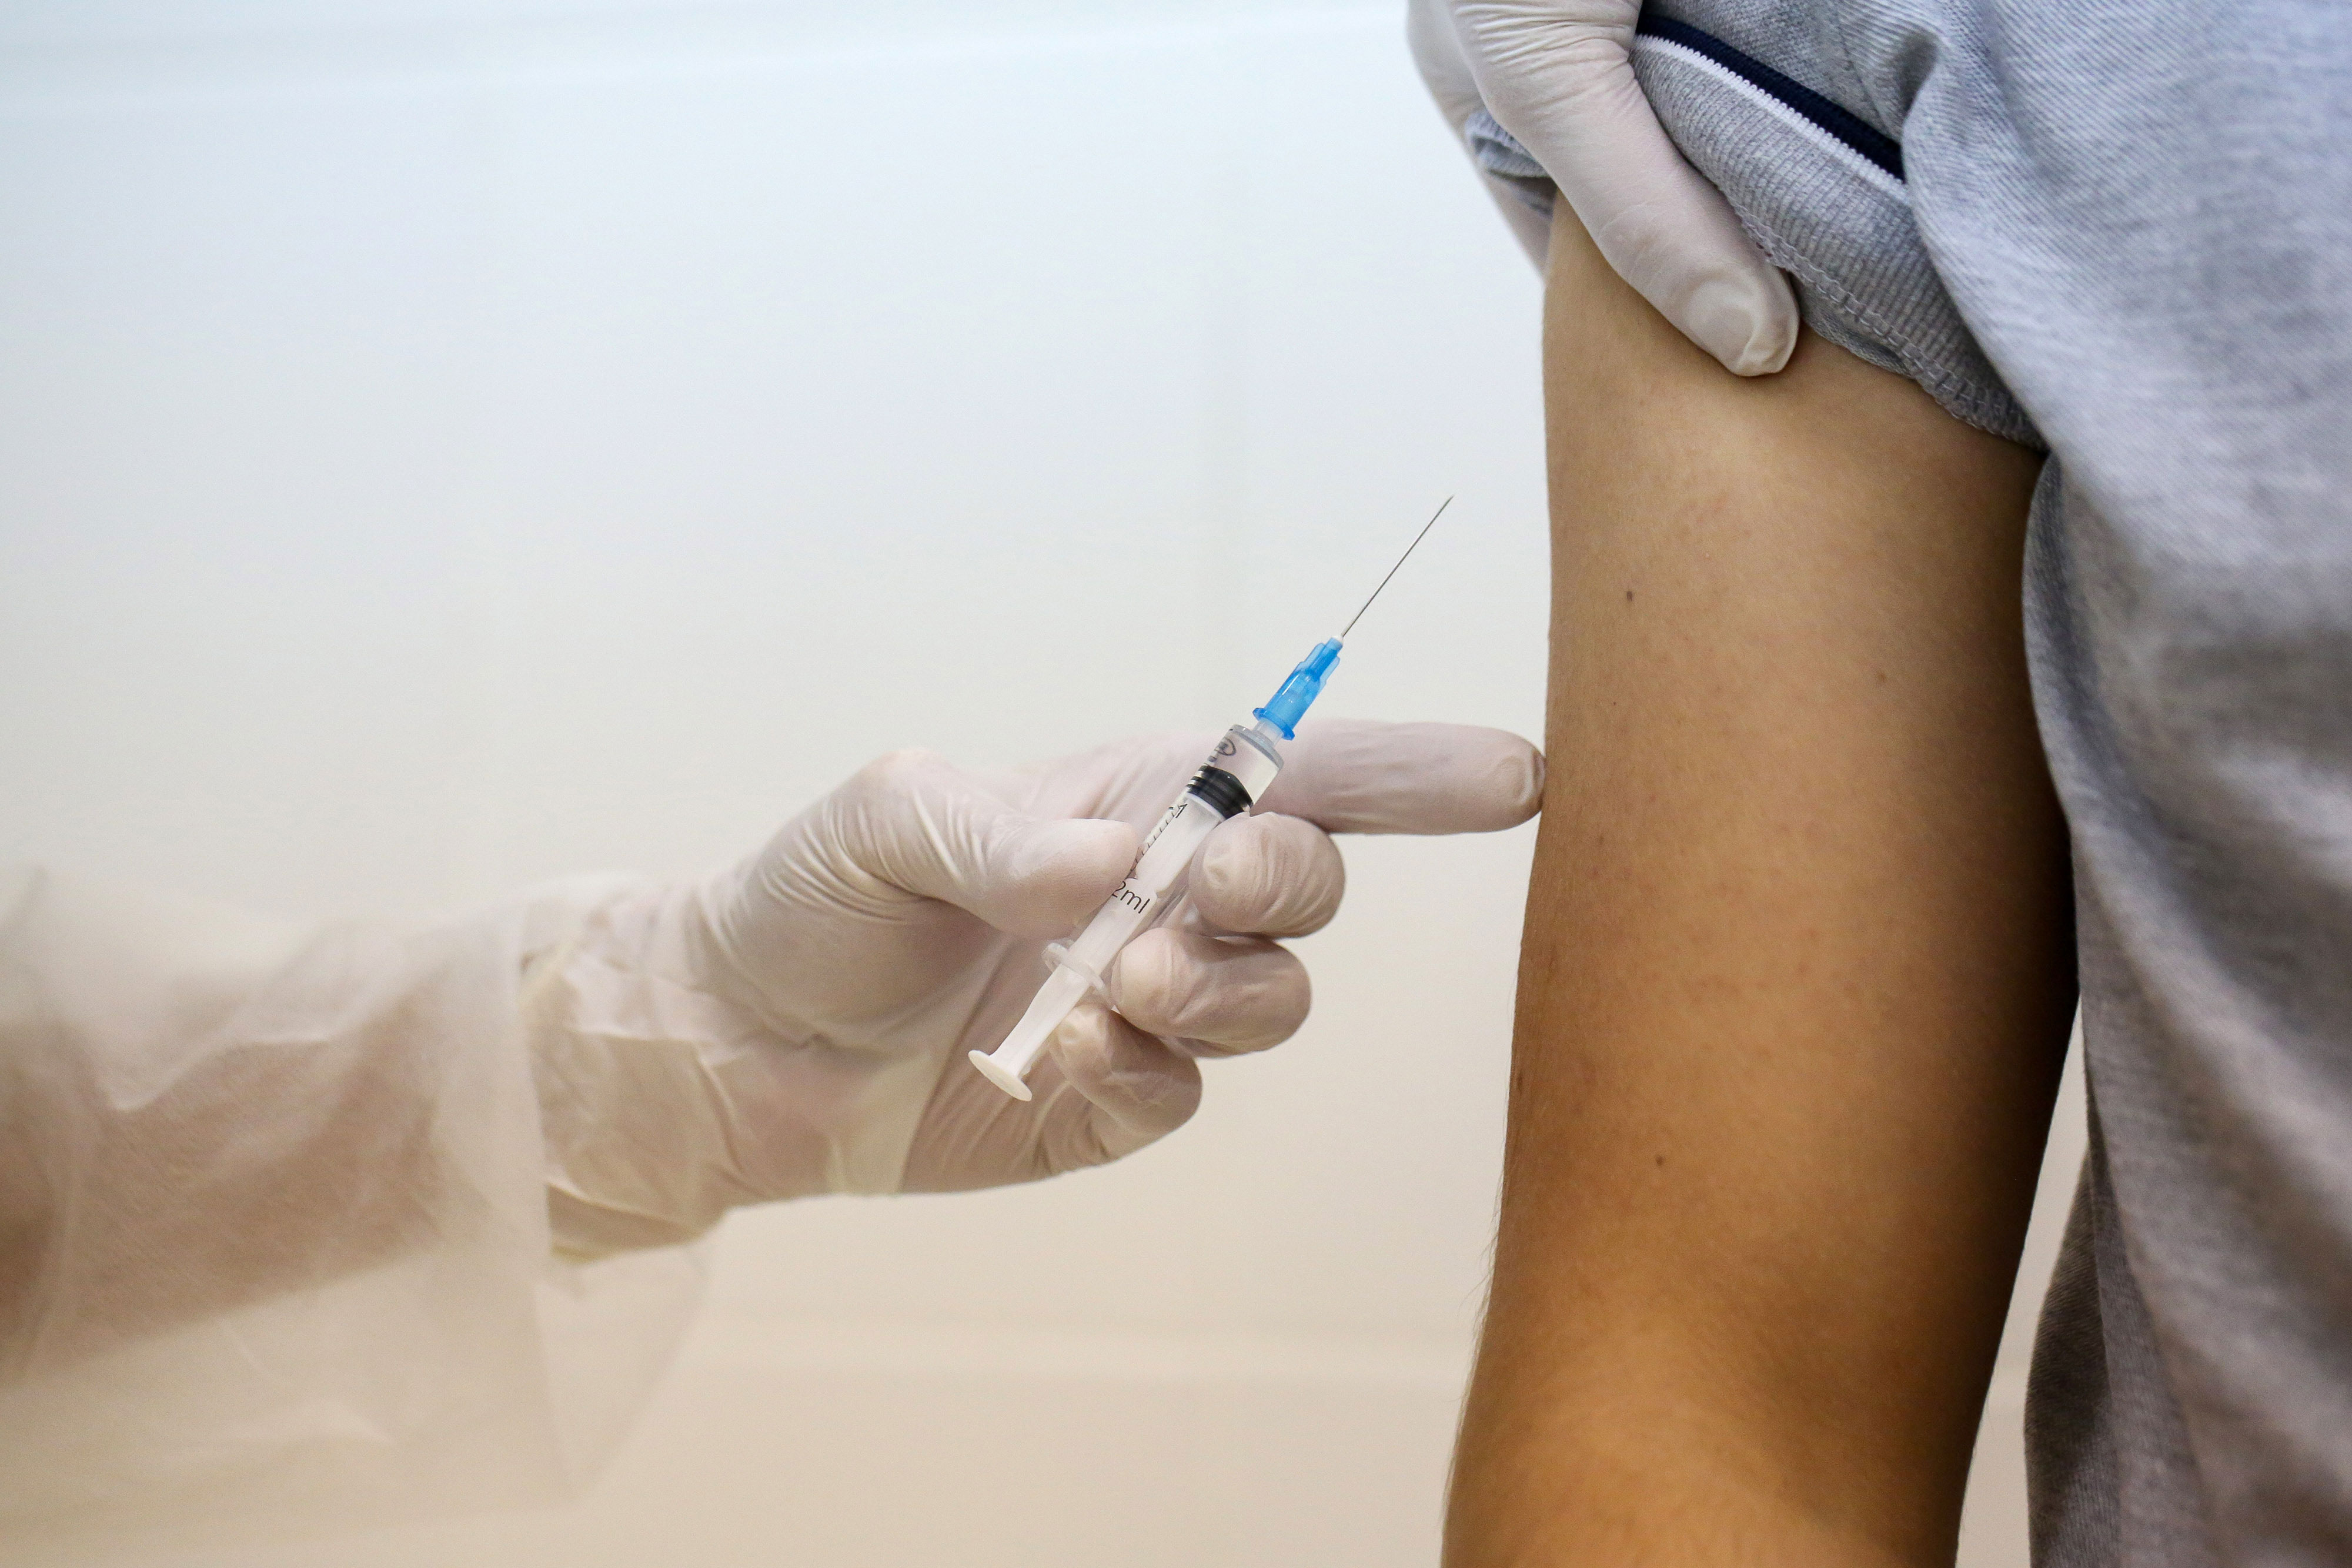 A health worker in Moscow prepares to inject the Sputnik V coronavirus vaccine into a patient's arm during a trial on September 23. The vaccine was developed by the Gamaleya Research Institute of Epidemiology and Microbiology and the Russian Direct Investment Fund.